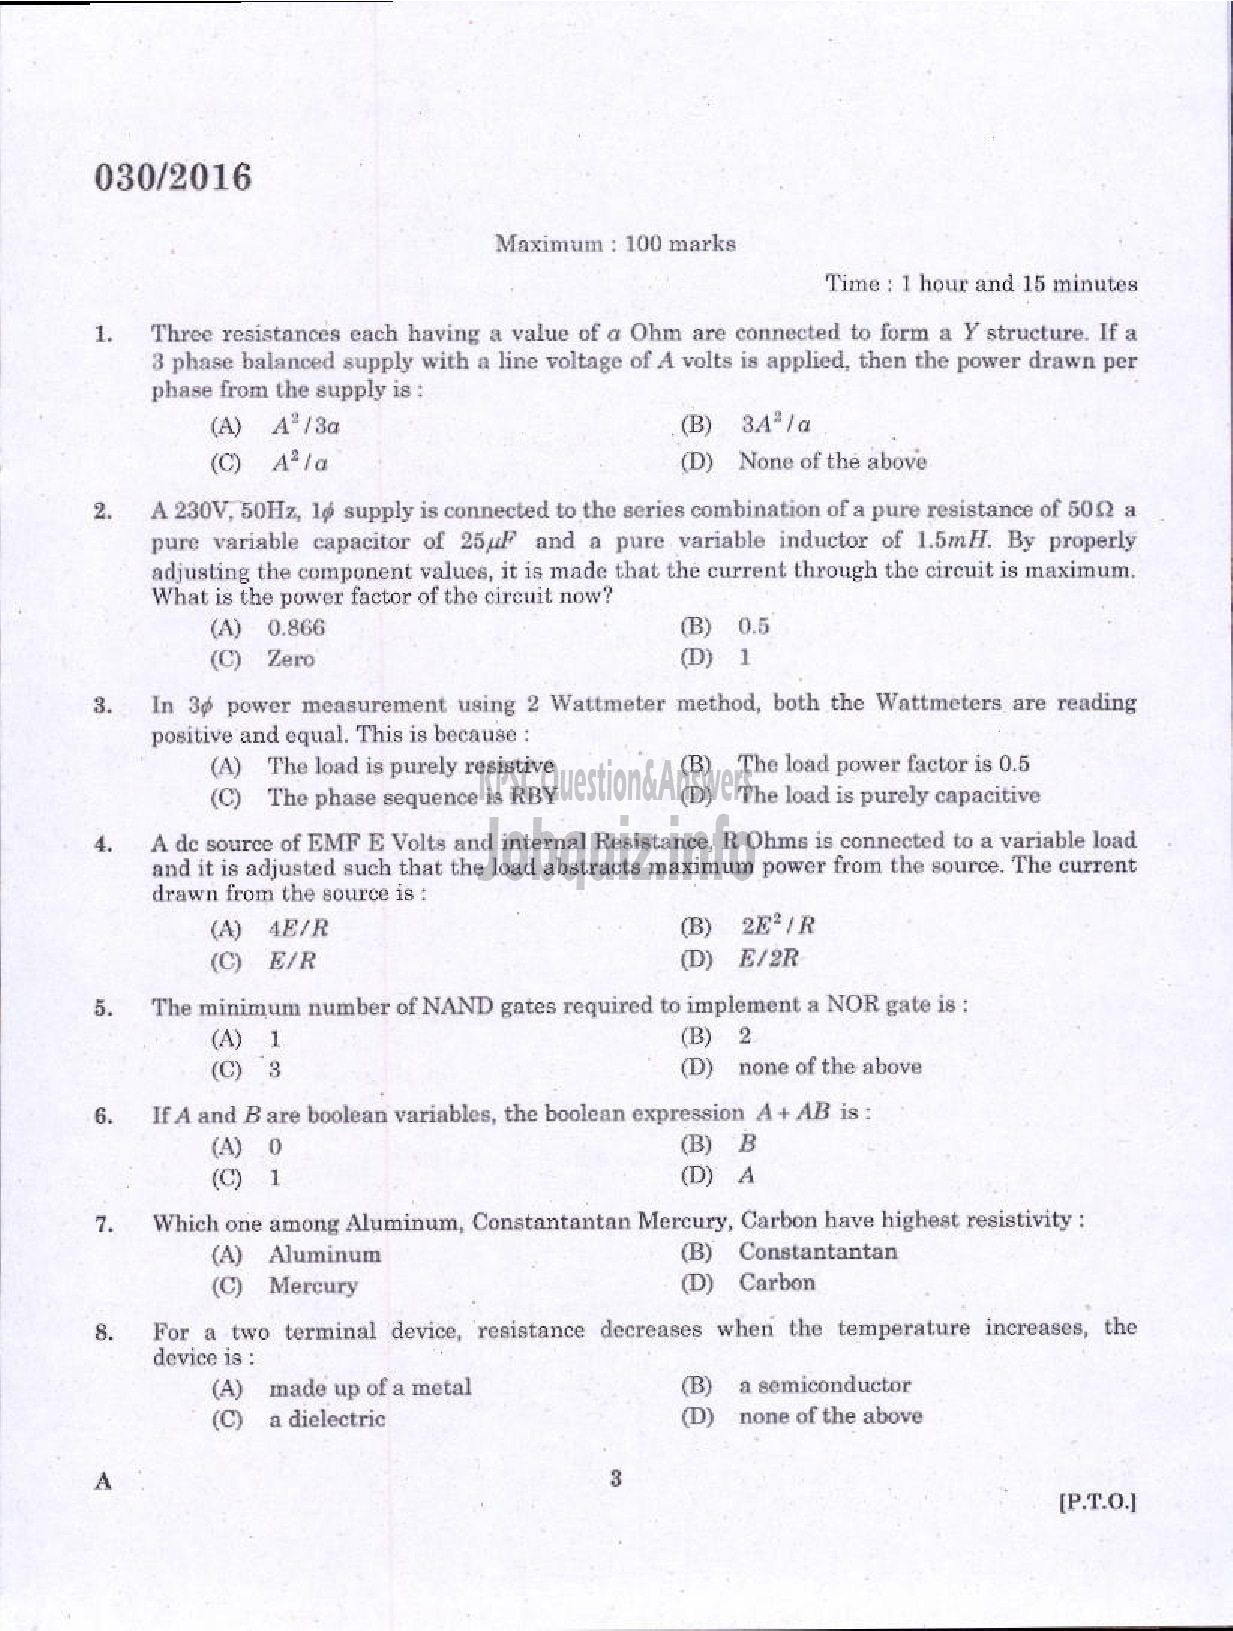 Kerala PSC Question Paper - ASSISTANT ENGINEER ELECTRICAL HARBOUR ENGINEERING-1